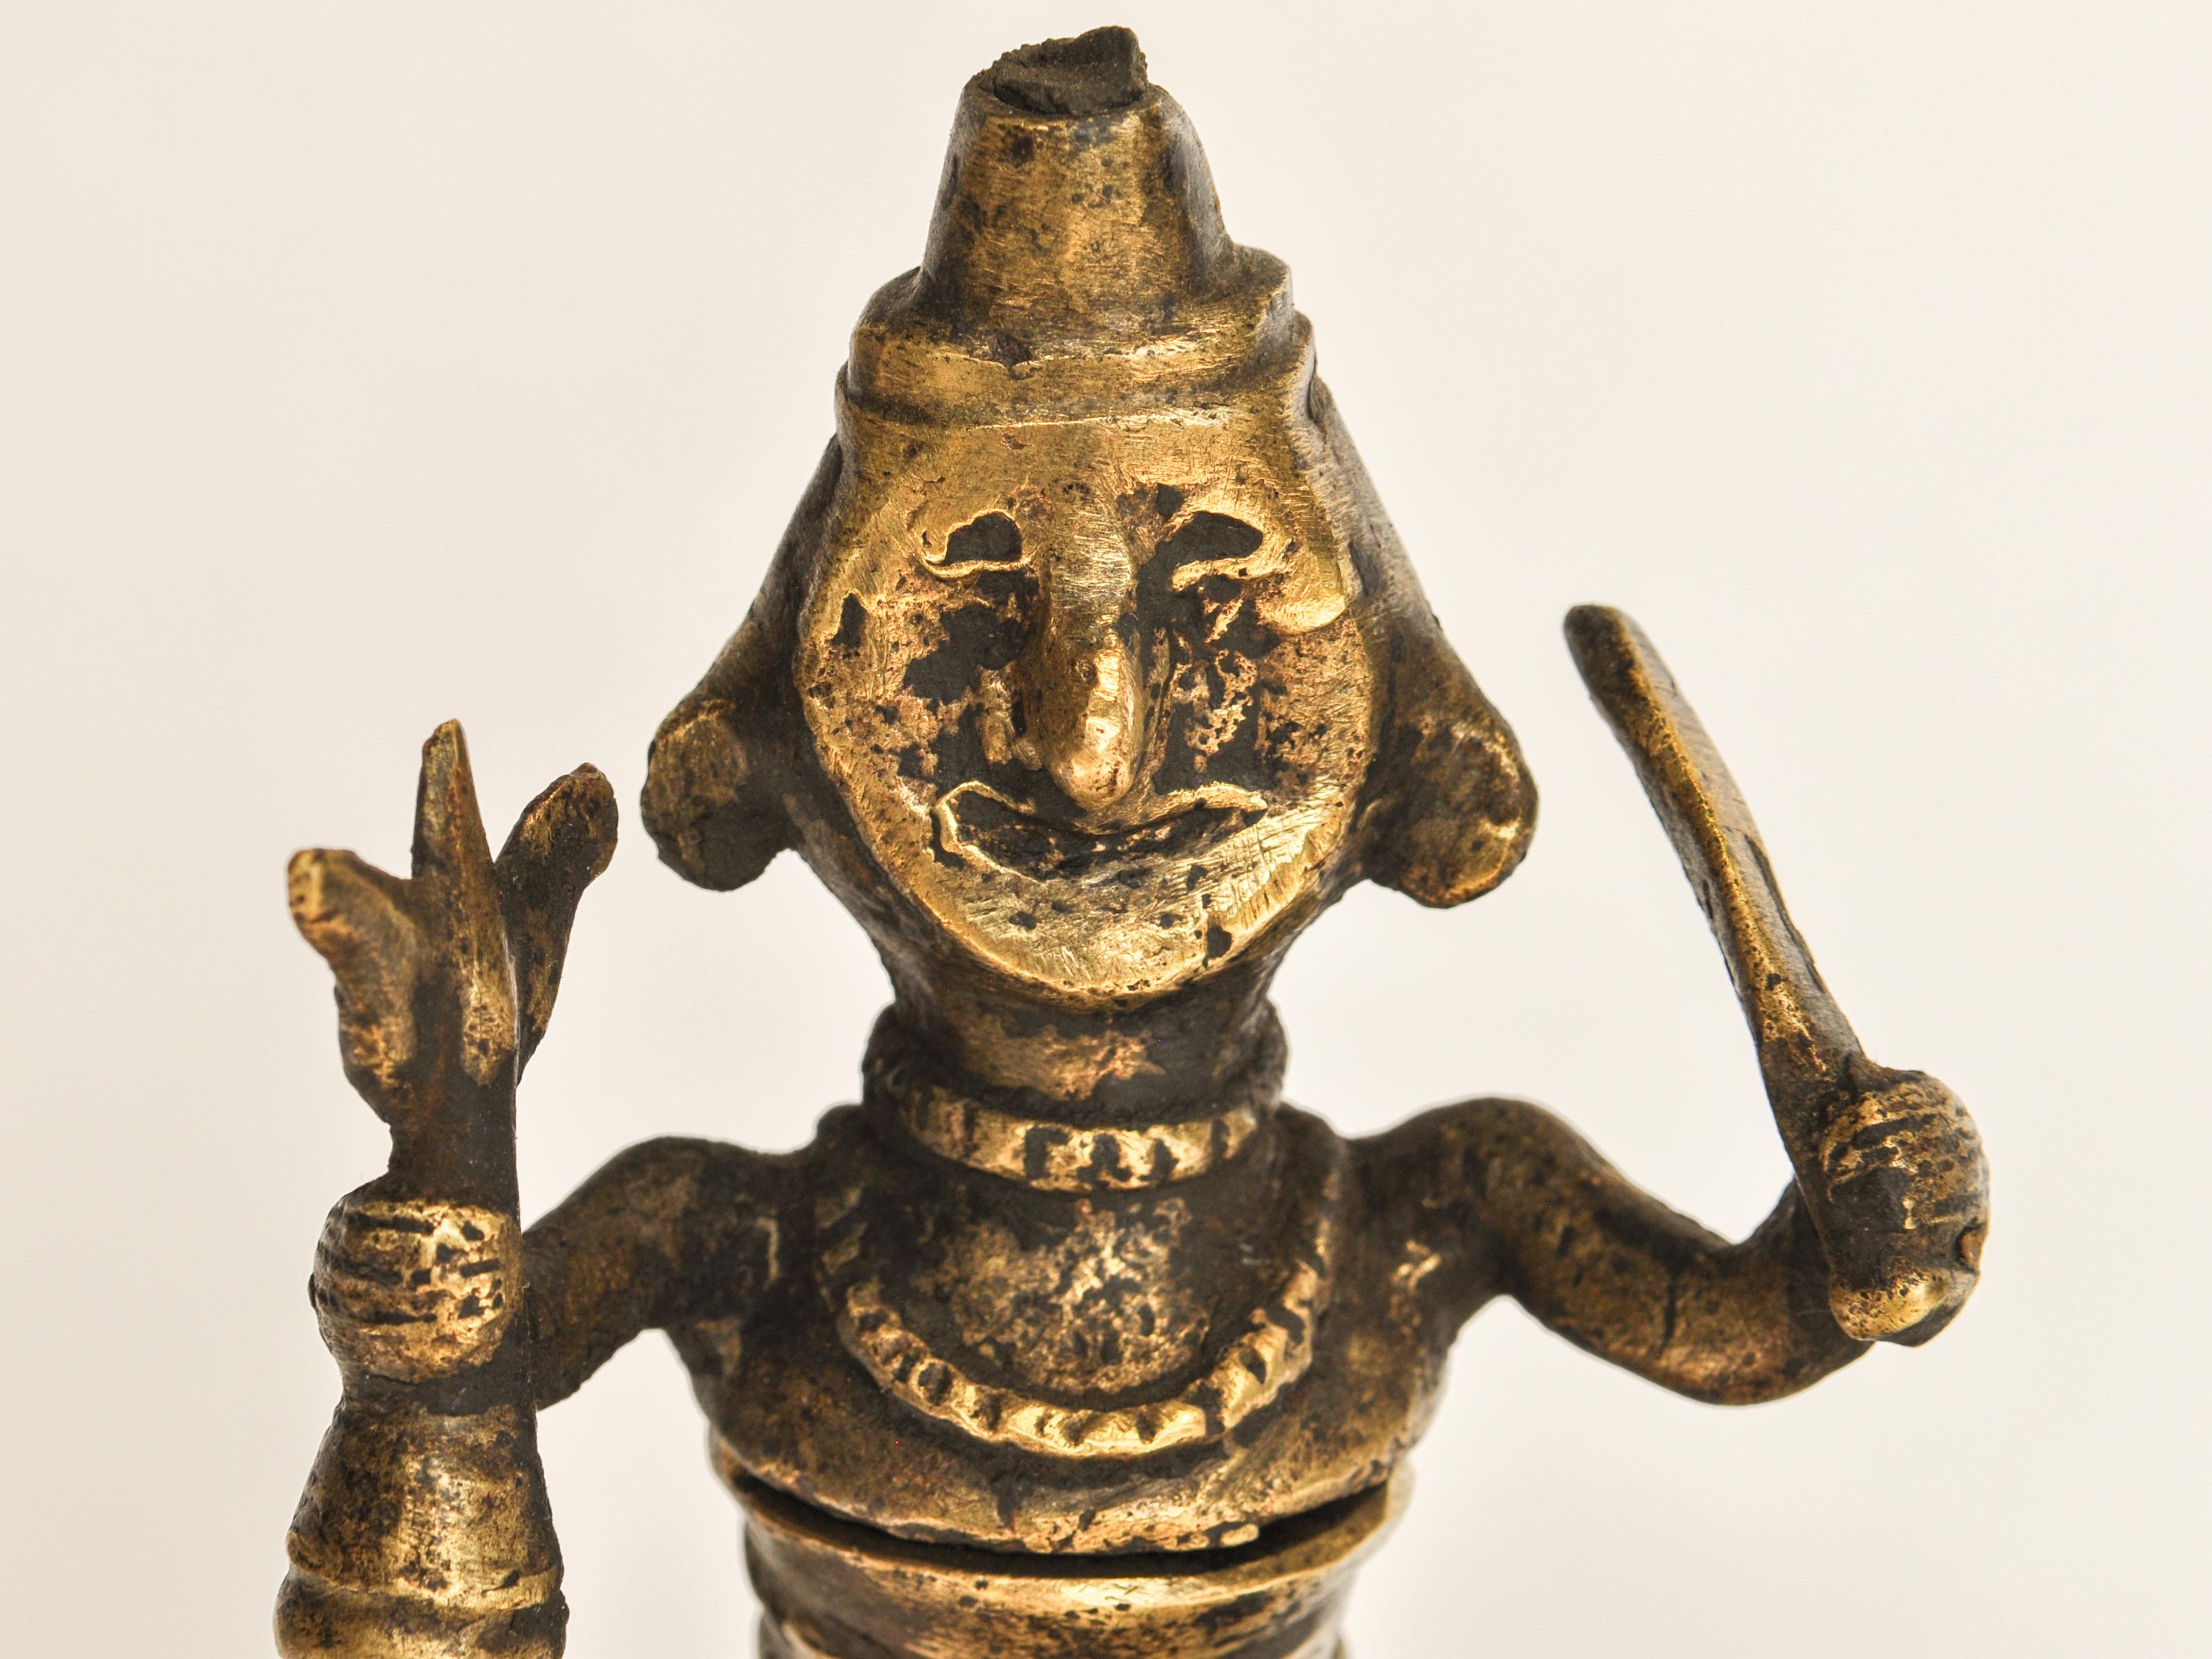 Vintage Bronze Oil Lamp with Shaman Figure from West Nepal, Mid-20th Century 1